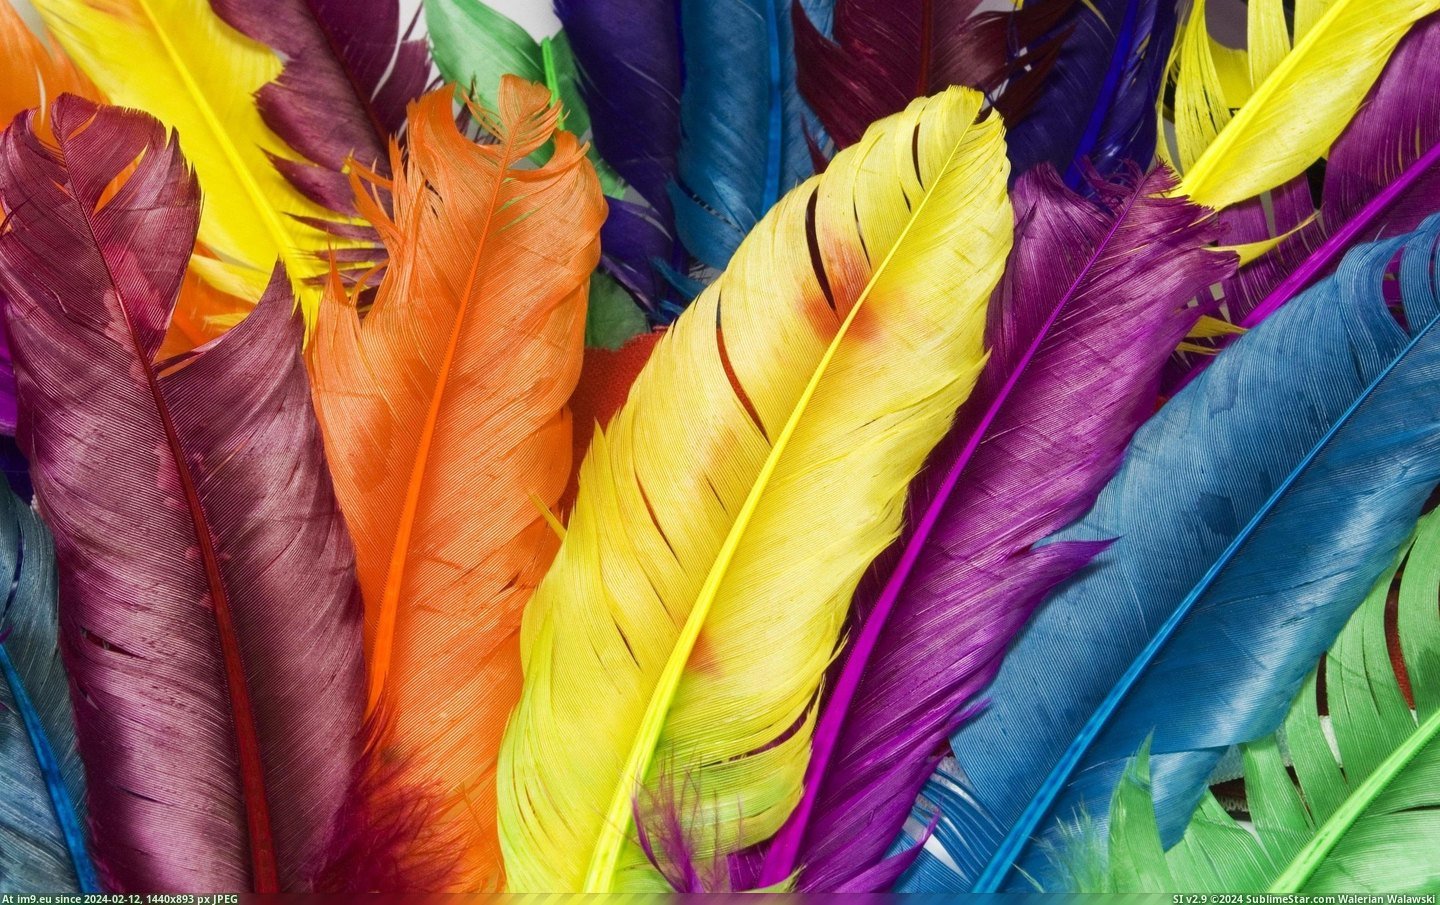 #Wallpaper #Beautiful #Feathers #Wide #Colors Feathers In Colors Wide HD Wallpaper Pic. (Bild von album Unique HD Wallpapers))